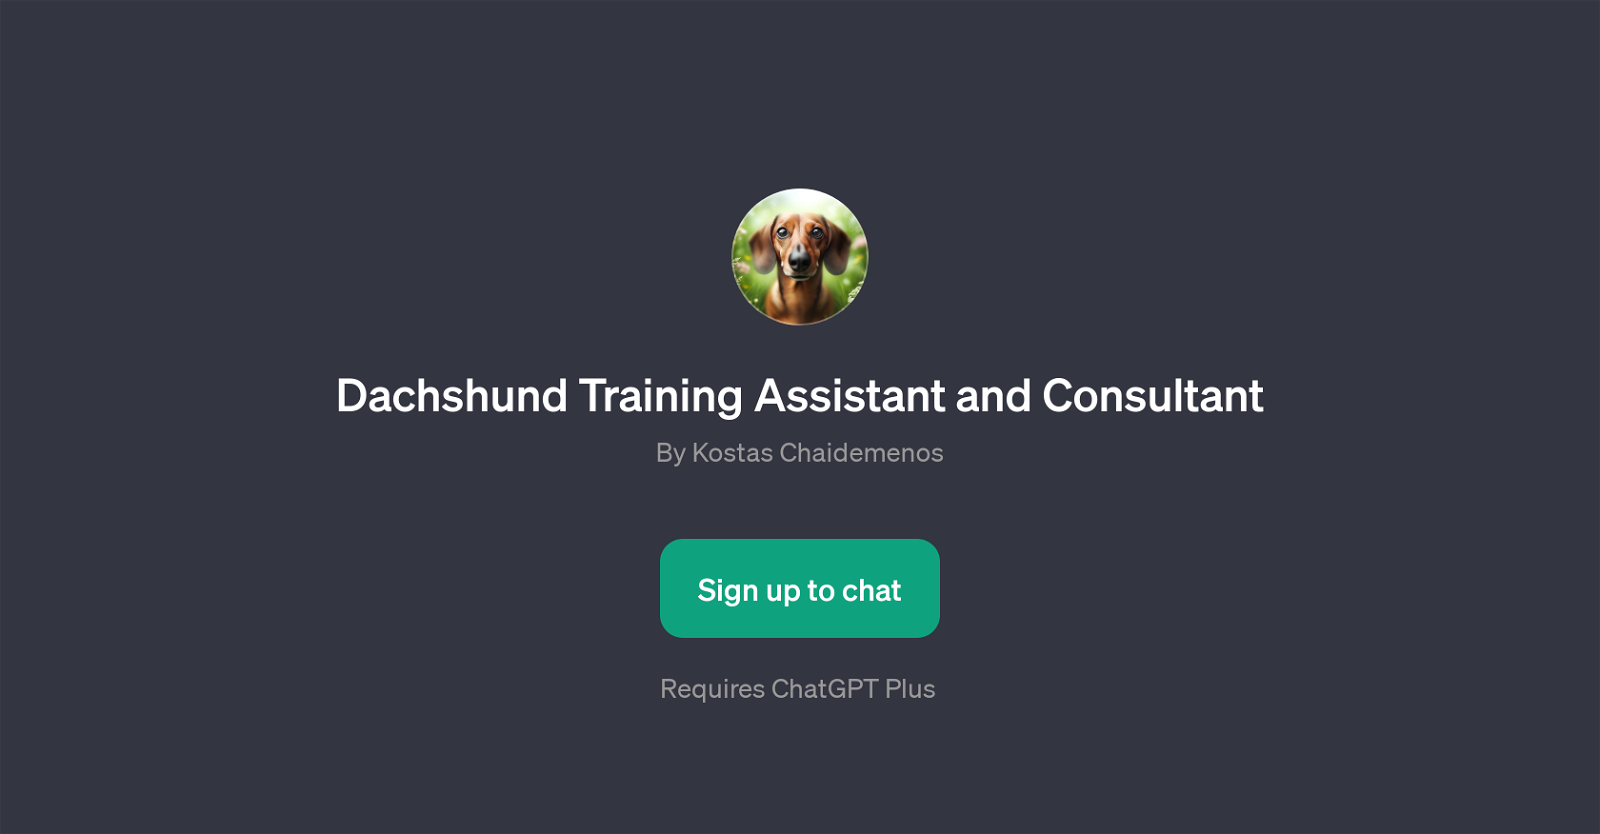 Dachshund Training Assistant and Consultant website